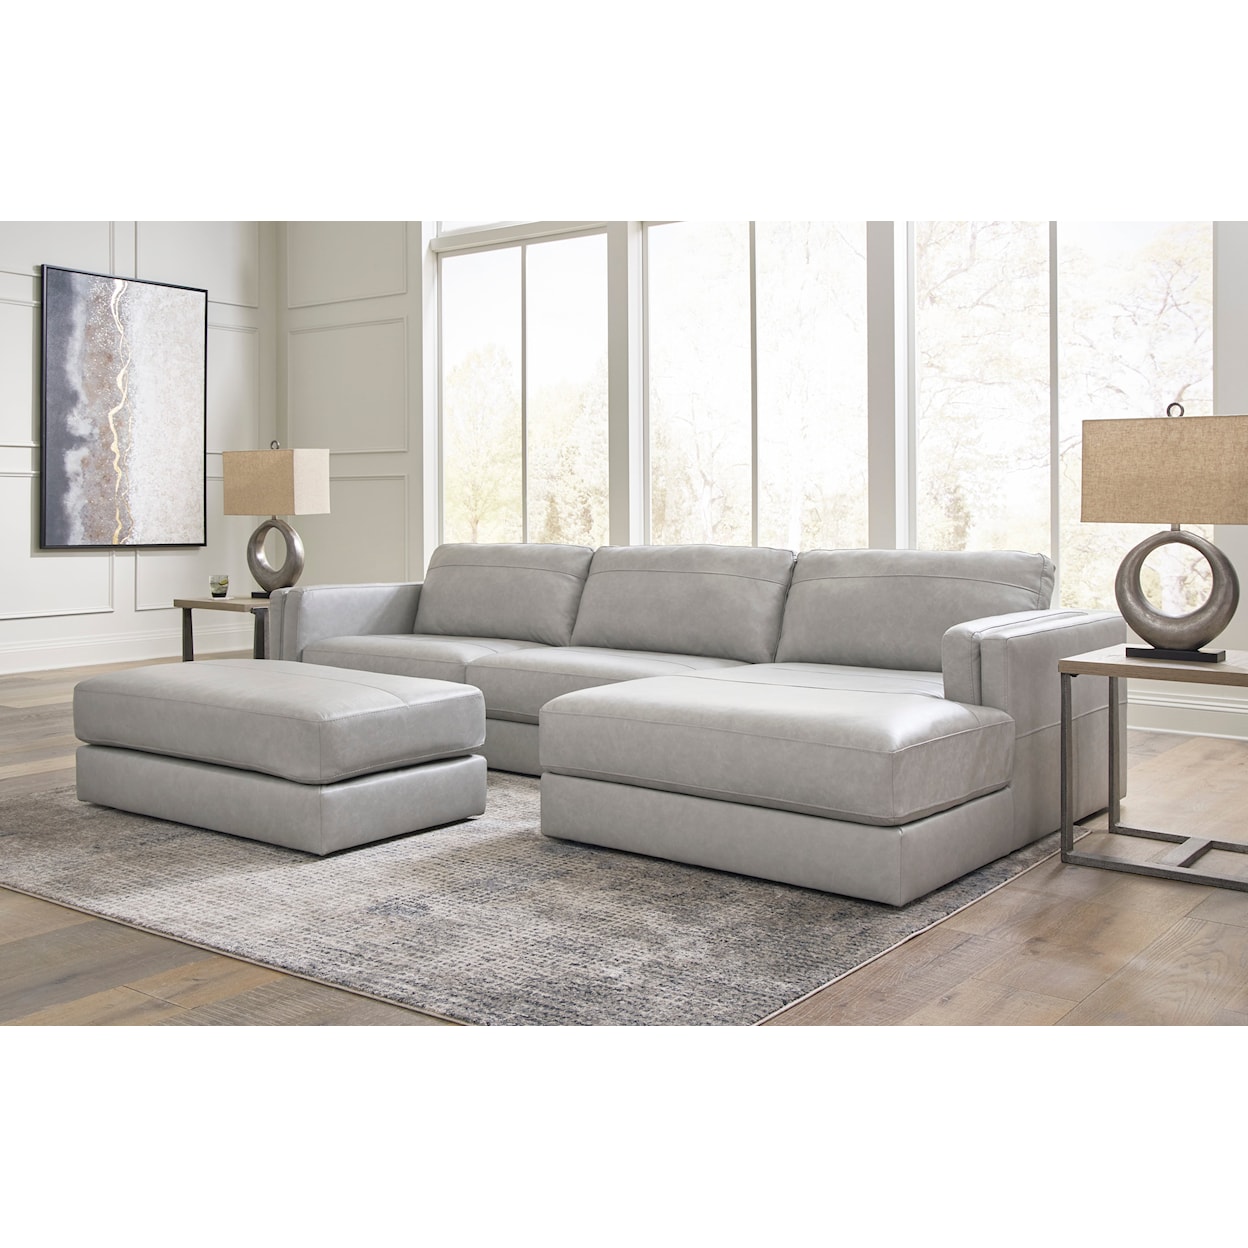 Signature Design Amiata 2-Piece Sectional With Chaise